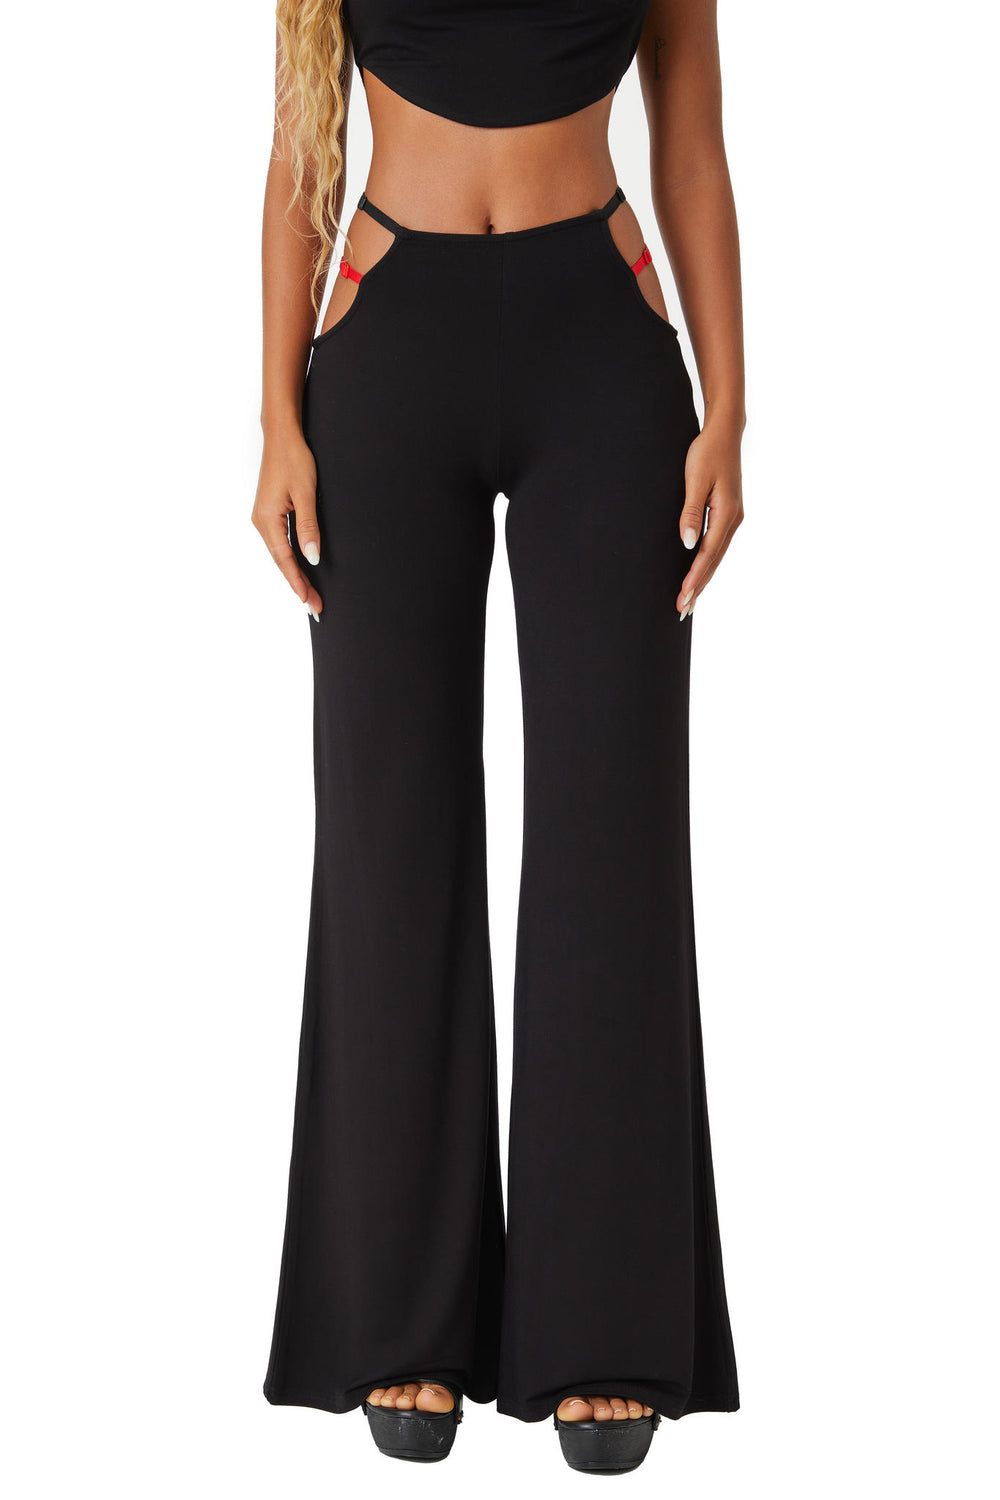 HATINA PANTS - ONFEMME By Lindsey's Kloset